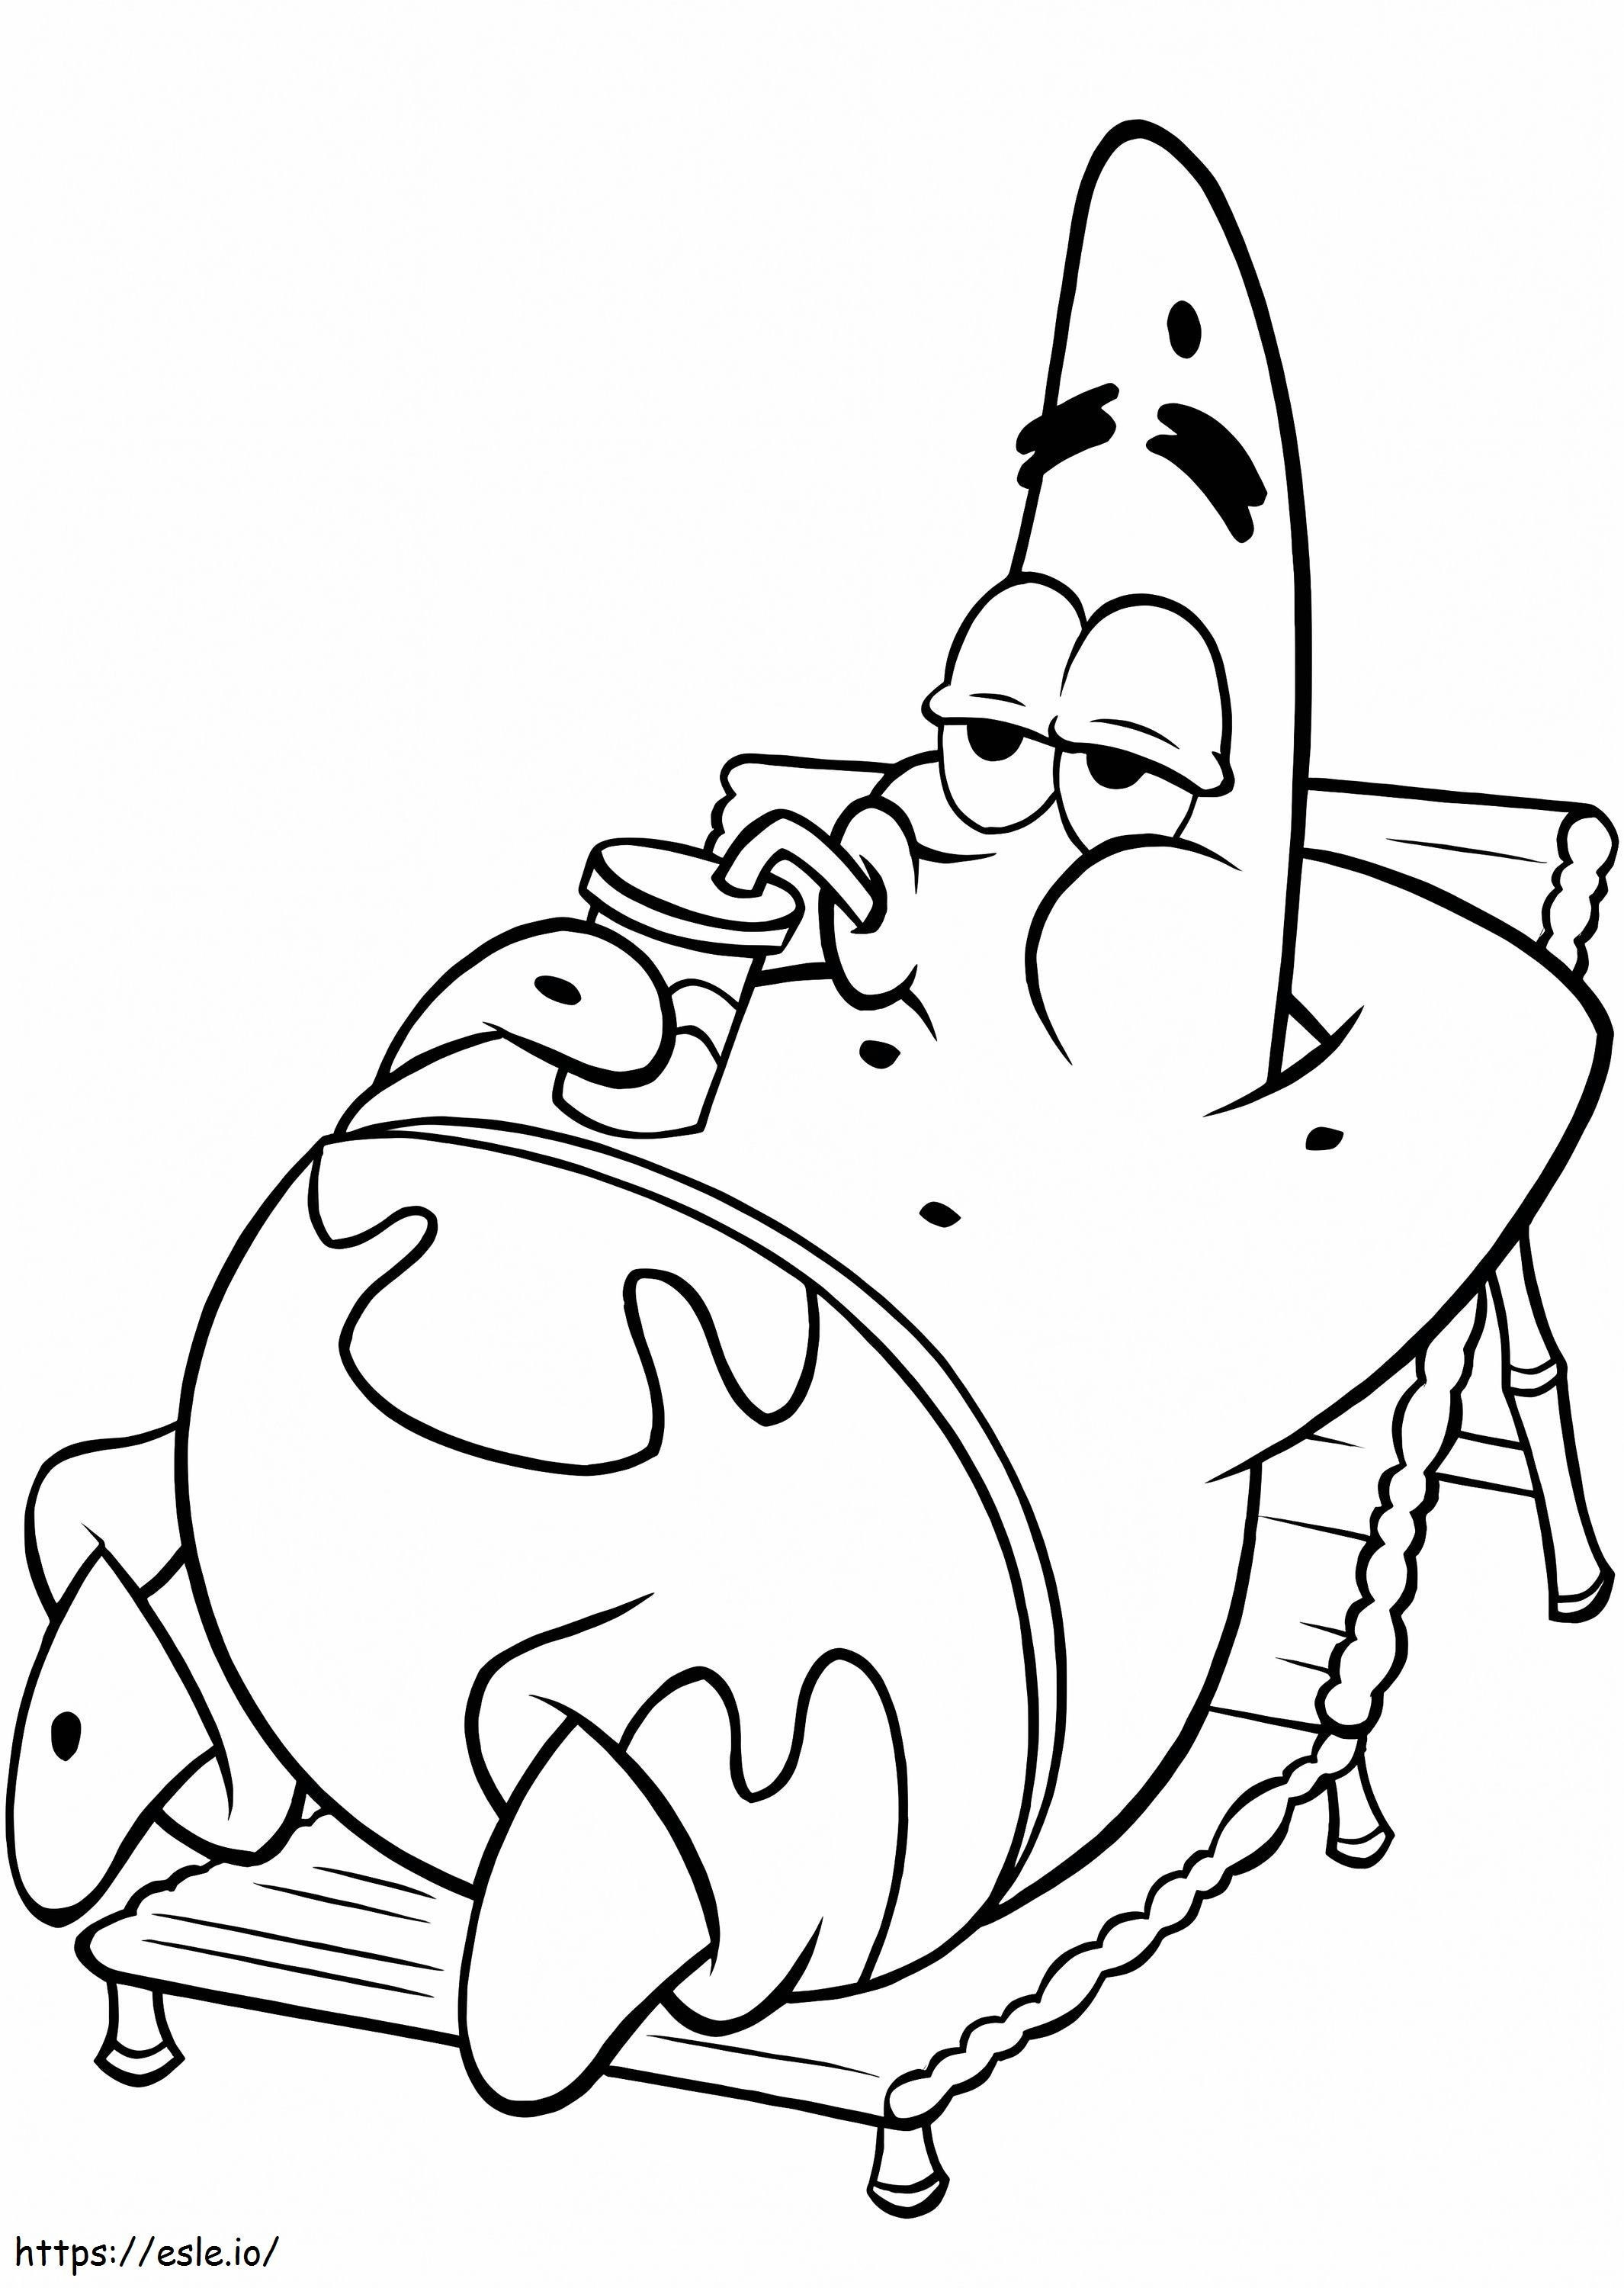 Patrick Star Lying And Drinking Water On The Beach coloring page